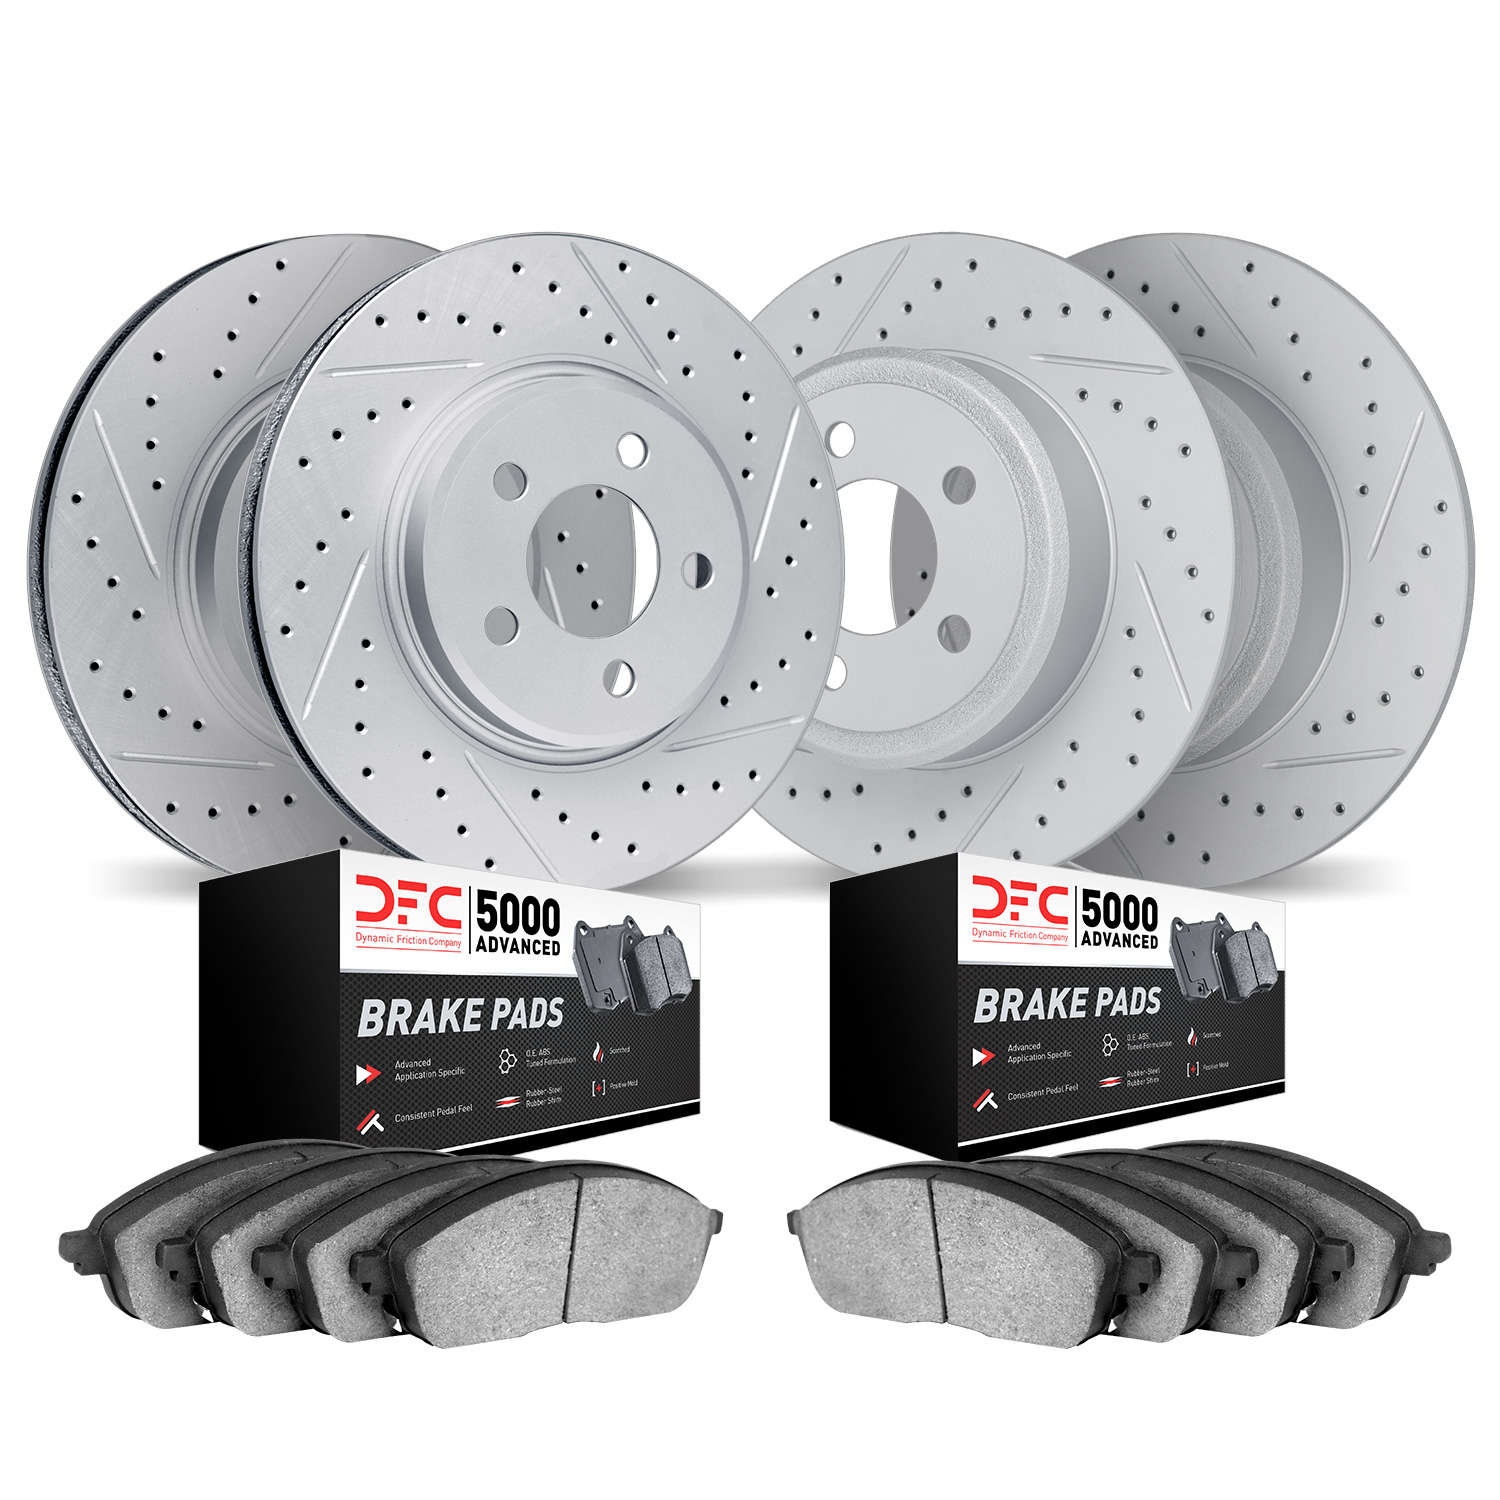 2504-72027 Geoperformance Drilled/Slotted Rotors w/5000 Advanced Brake Pads Kit, 2009-2015 Mitsubishi, Position: Front and Rear